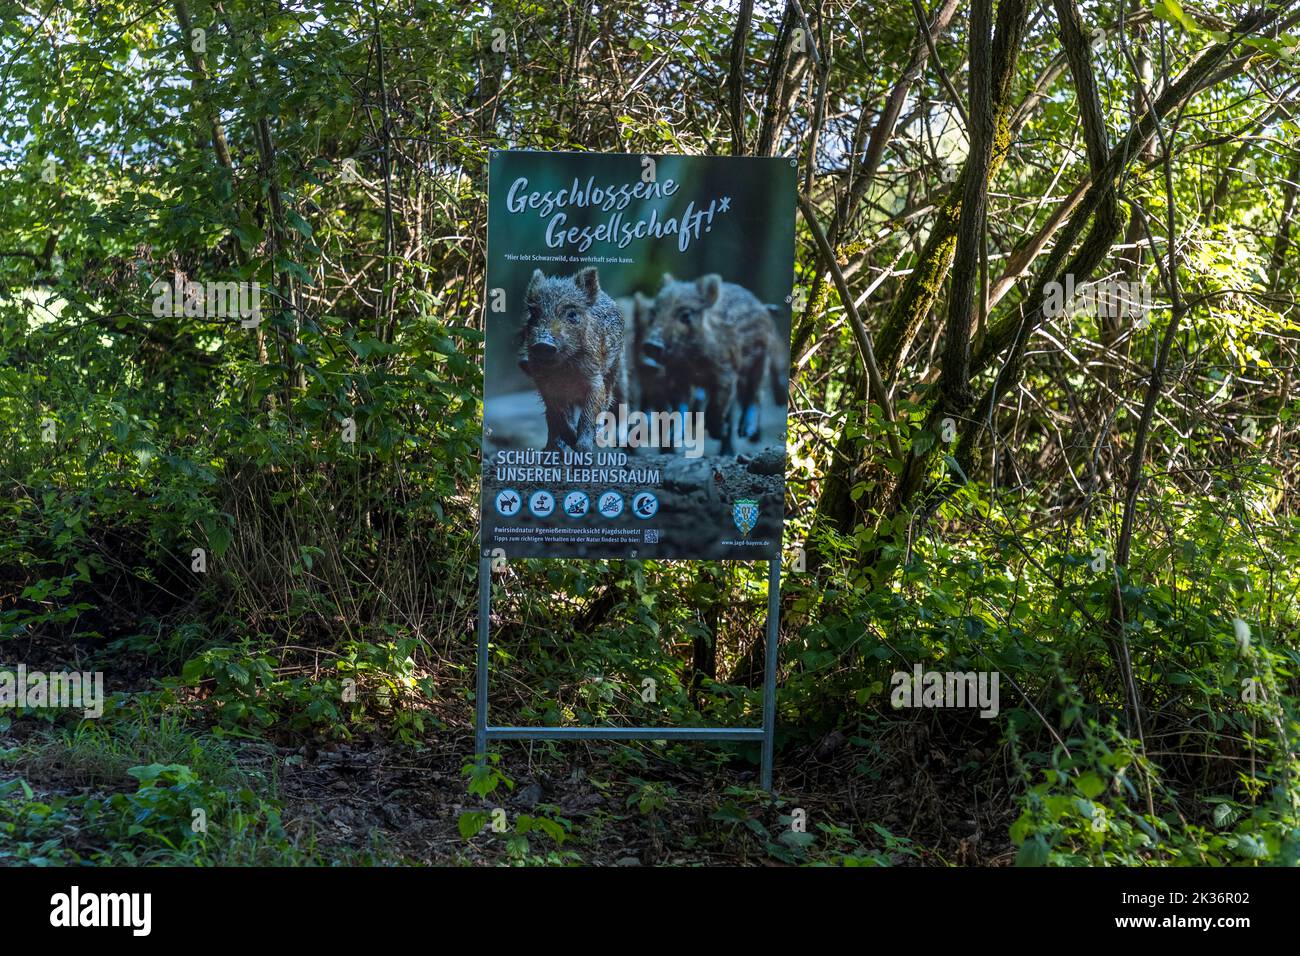 Wild boar advertising poster in forest. Lichtenfels, Germany Stock Photo